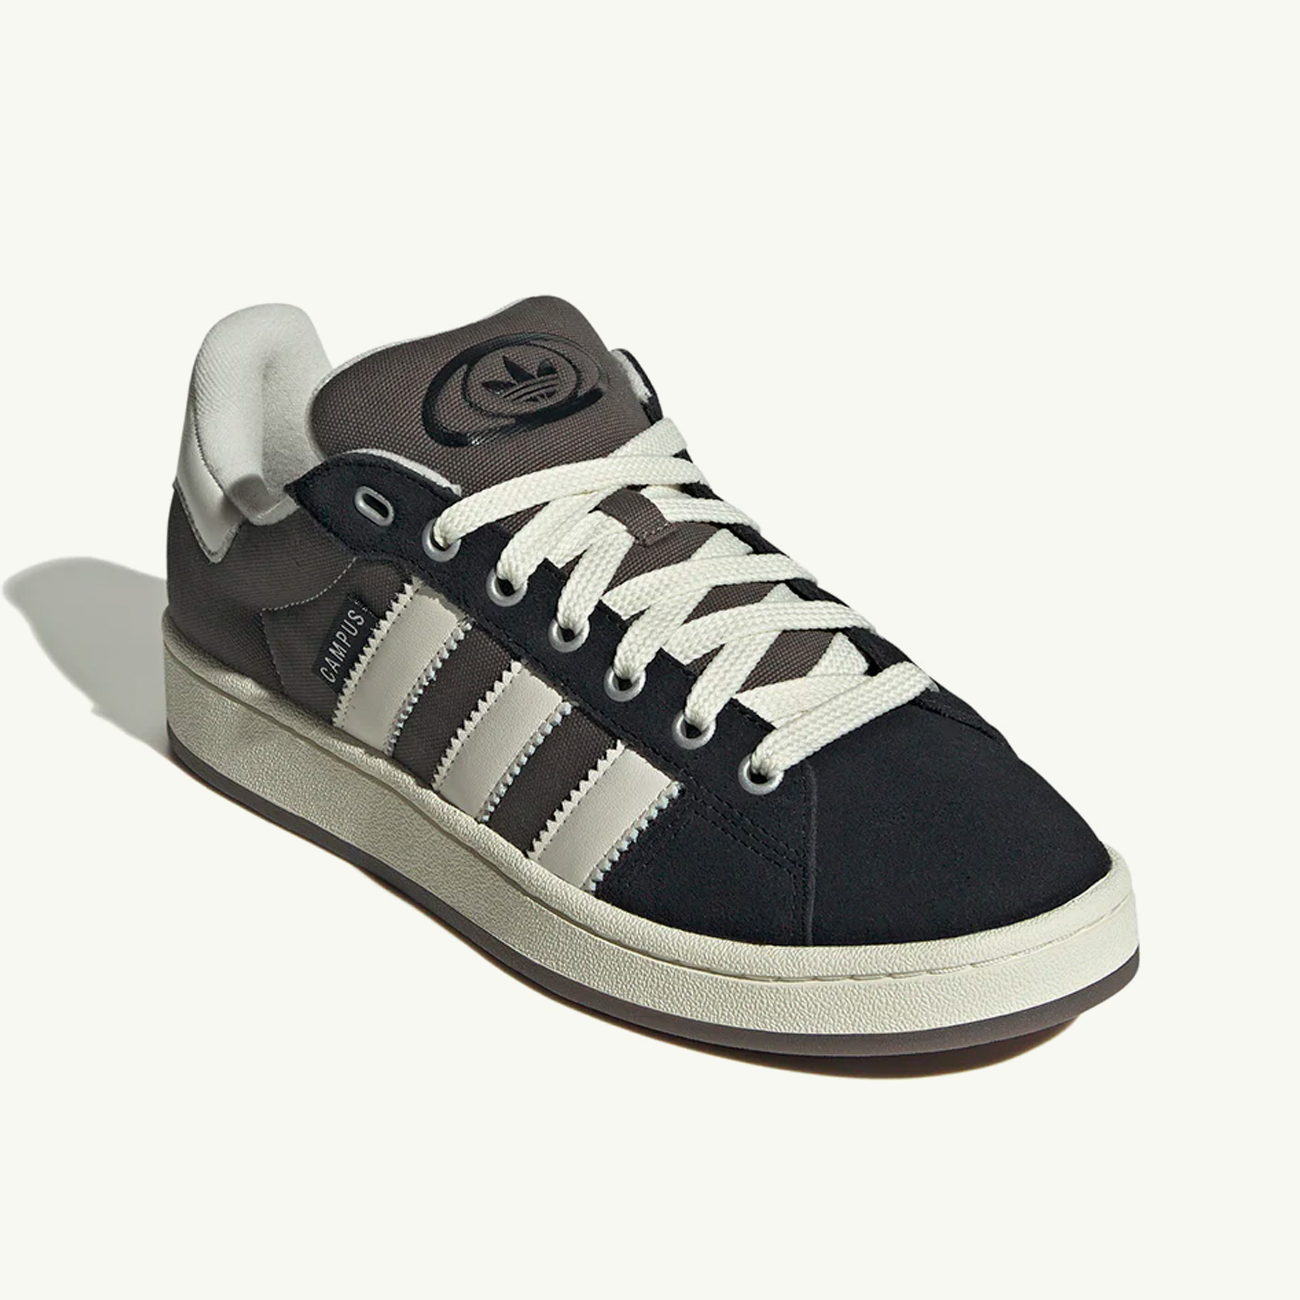 Campus 00s - Charcoal/White/Black